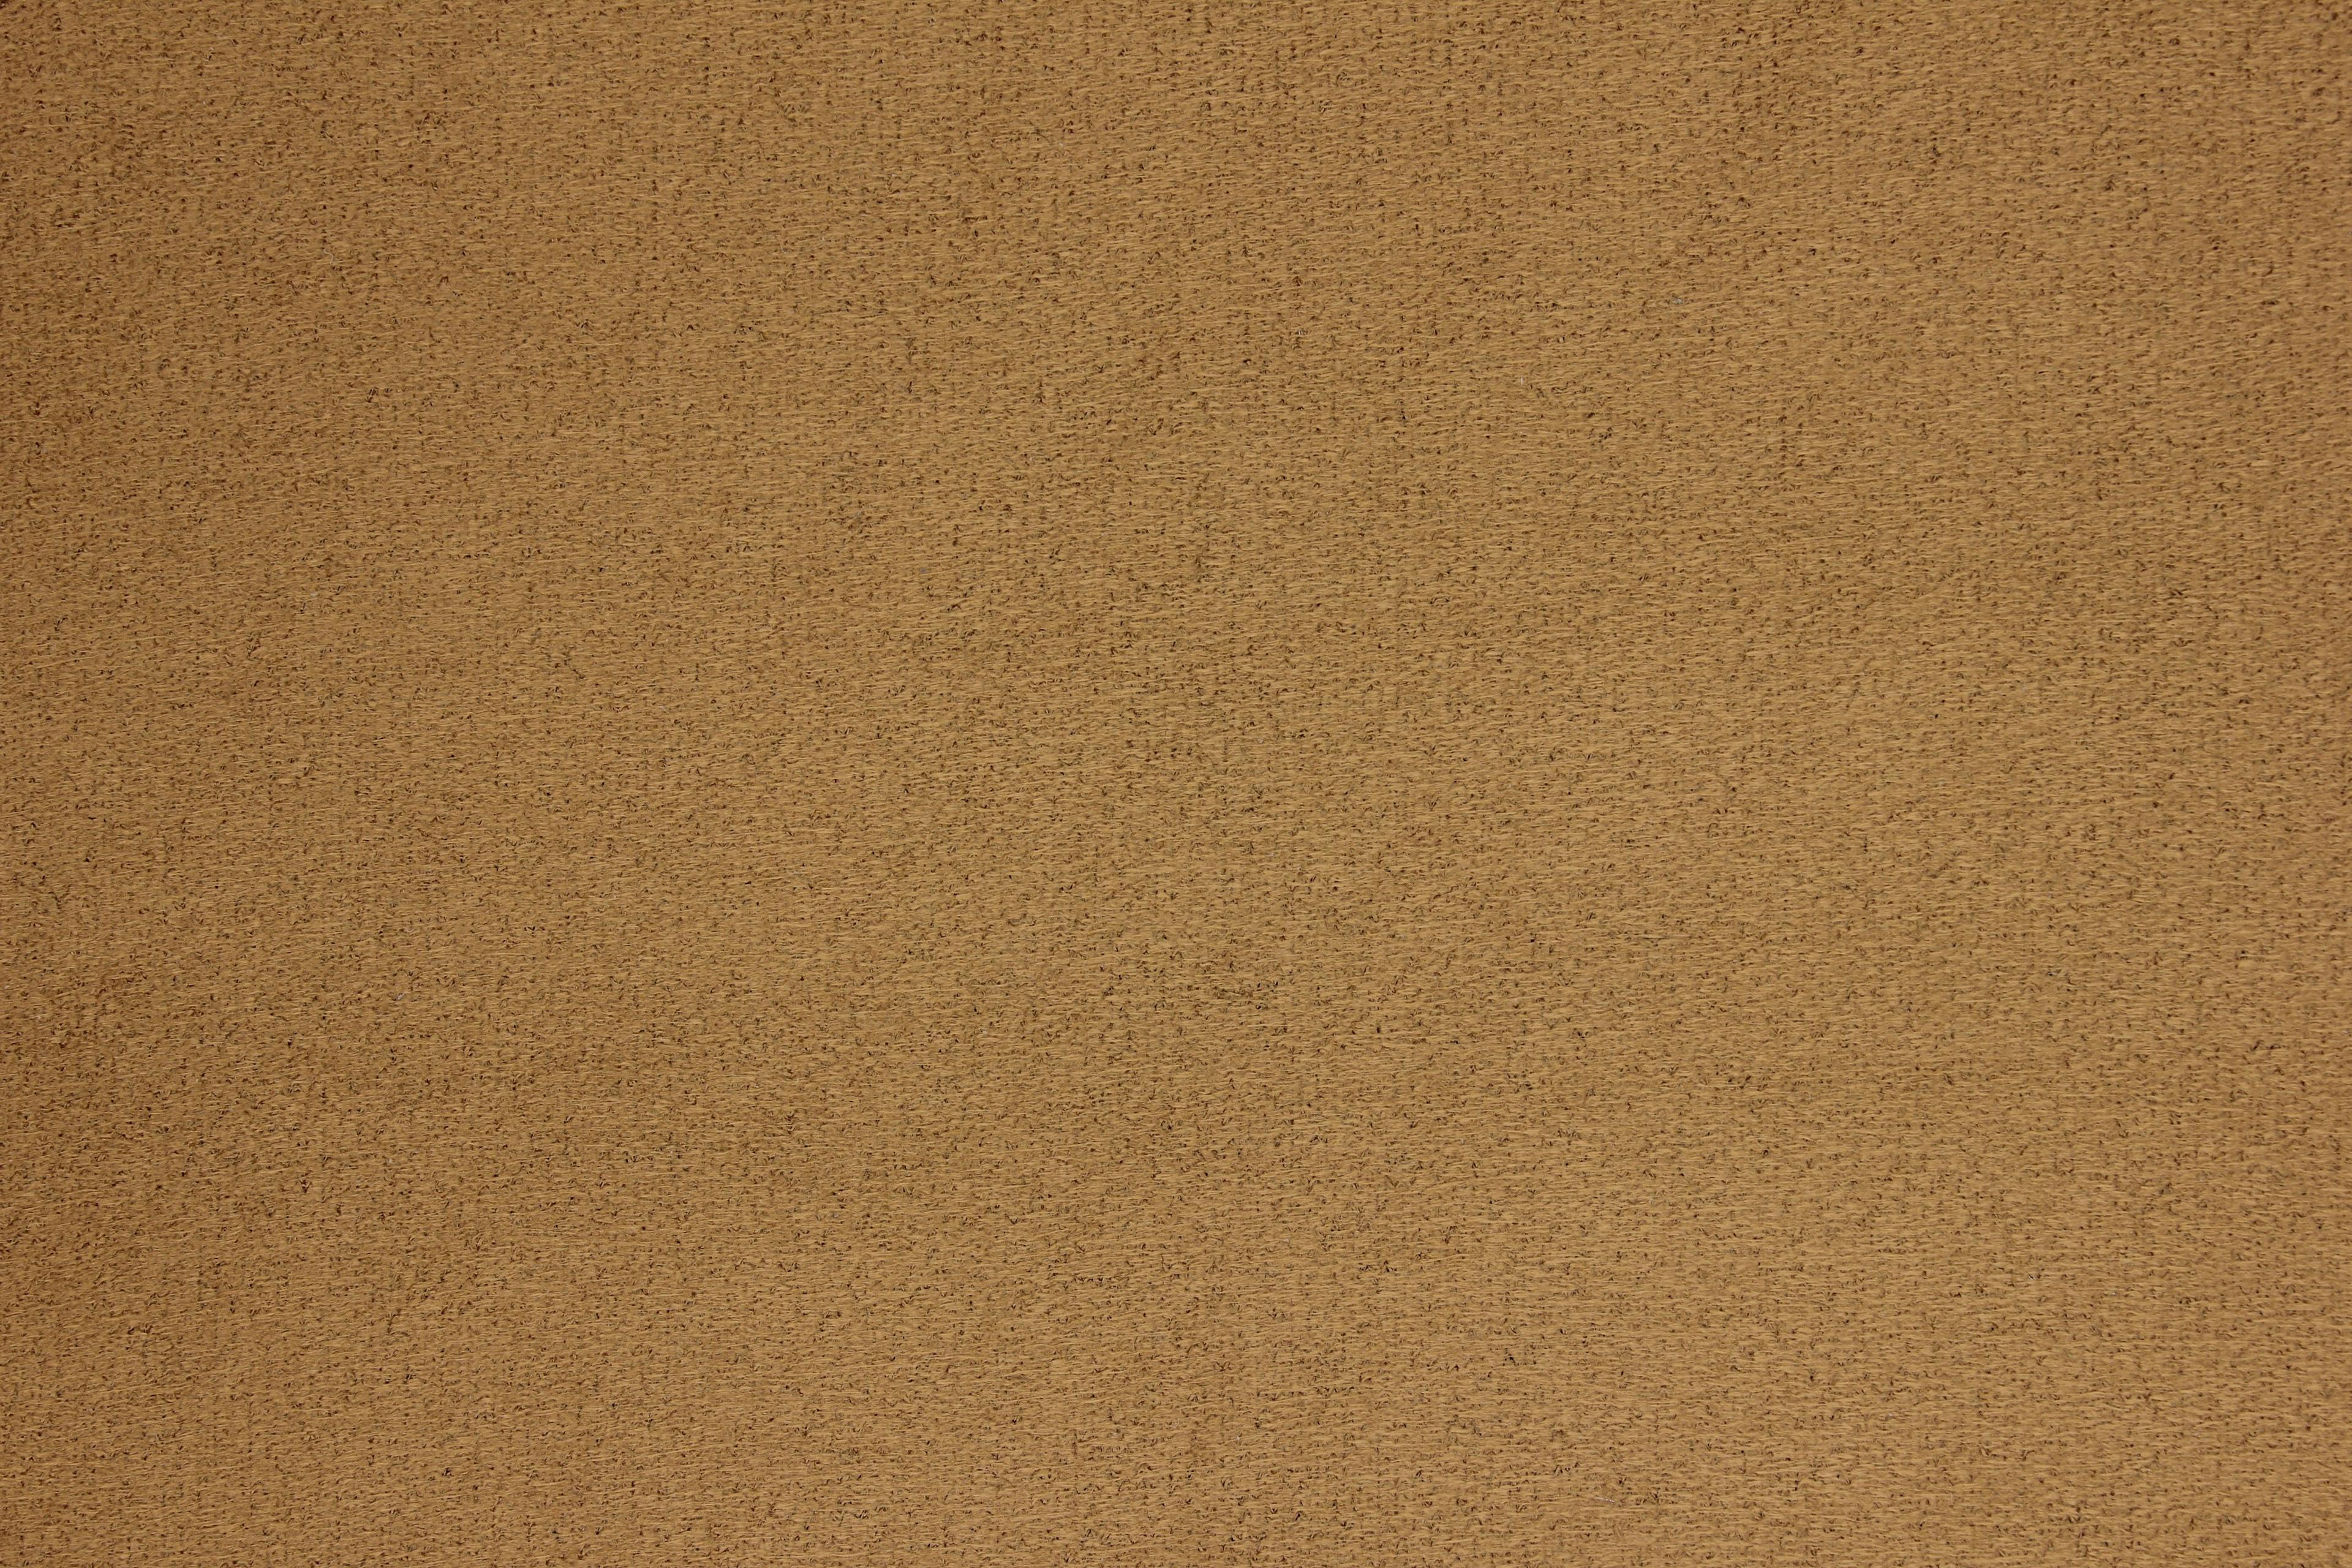 Sand Beige Suede Headliner Fabric with Foam & Felt Backing 150 CM - 59" Wide - Elevate Your Car's Interior | Perfect for Upholstery, Sunroof